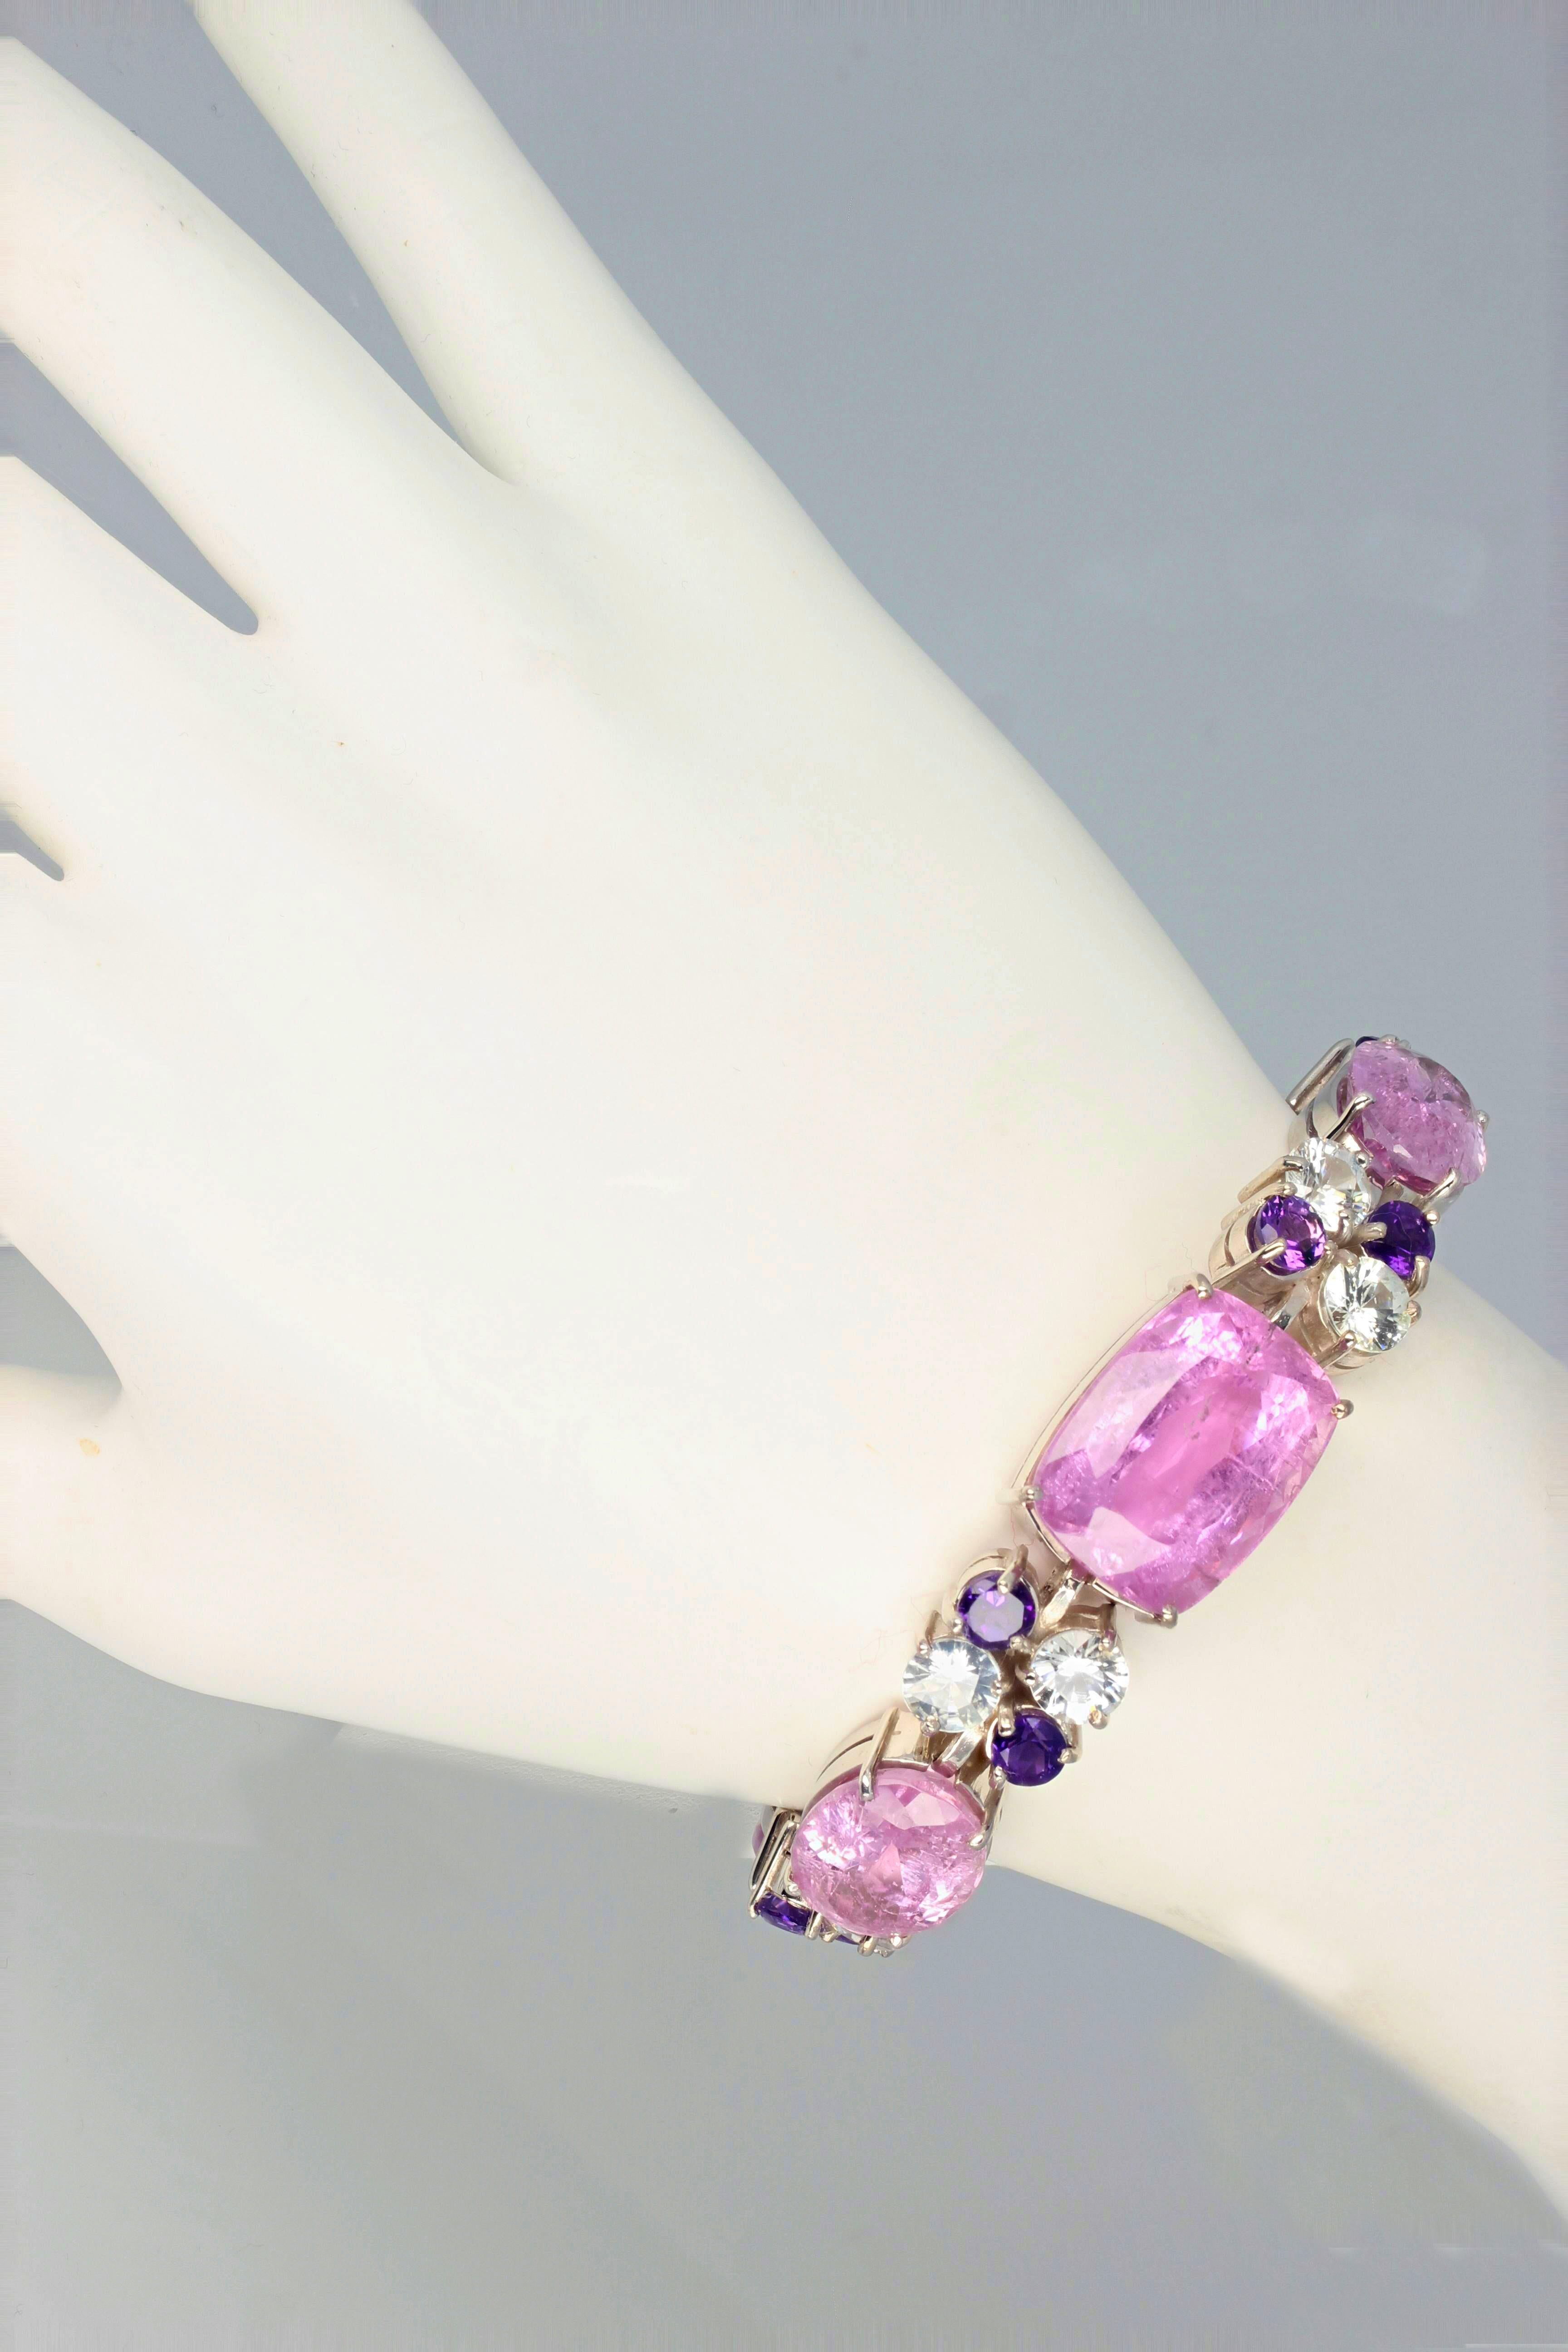 This amazing bracelet is set with the main center 24 carat natural Kunzite (20mm x 15mm) enhanced with brilliant white diamond cut natural Topaz  and little natural glittering Amethysts.  Set in this beautiful Sterling Silver bracelet it is 7 inches